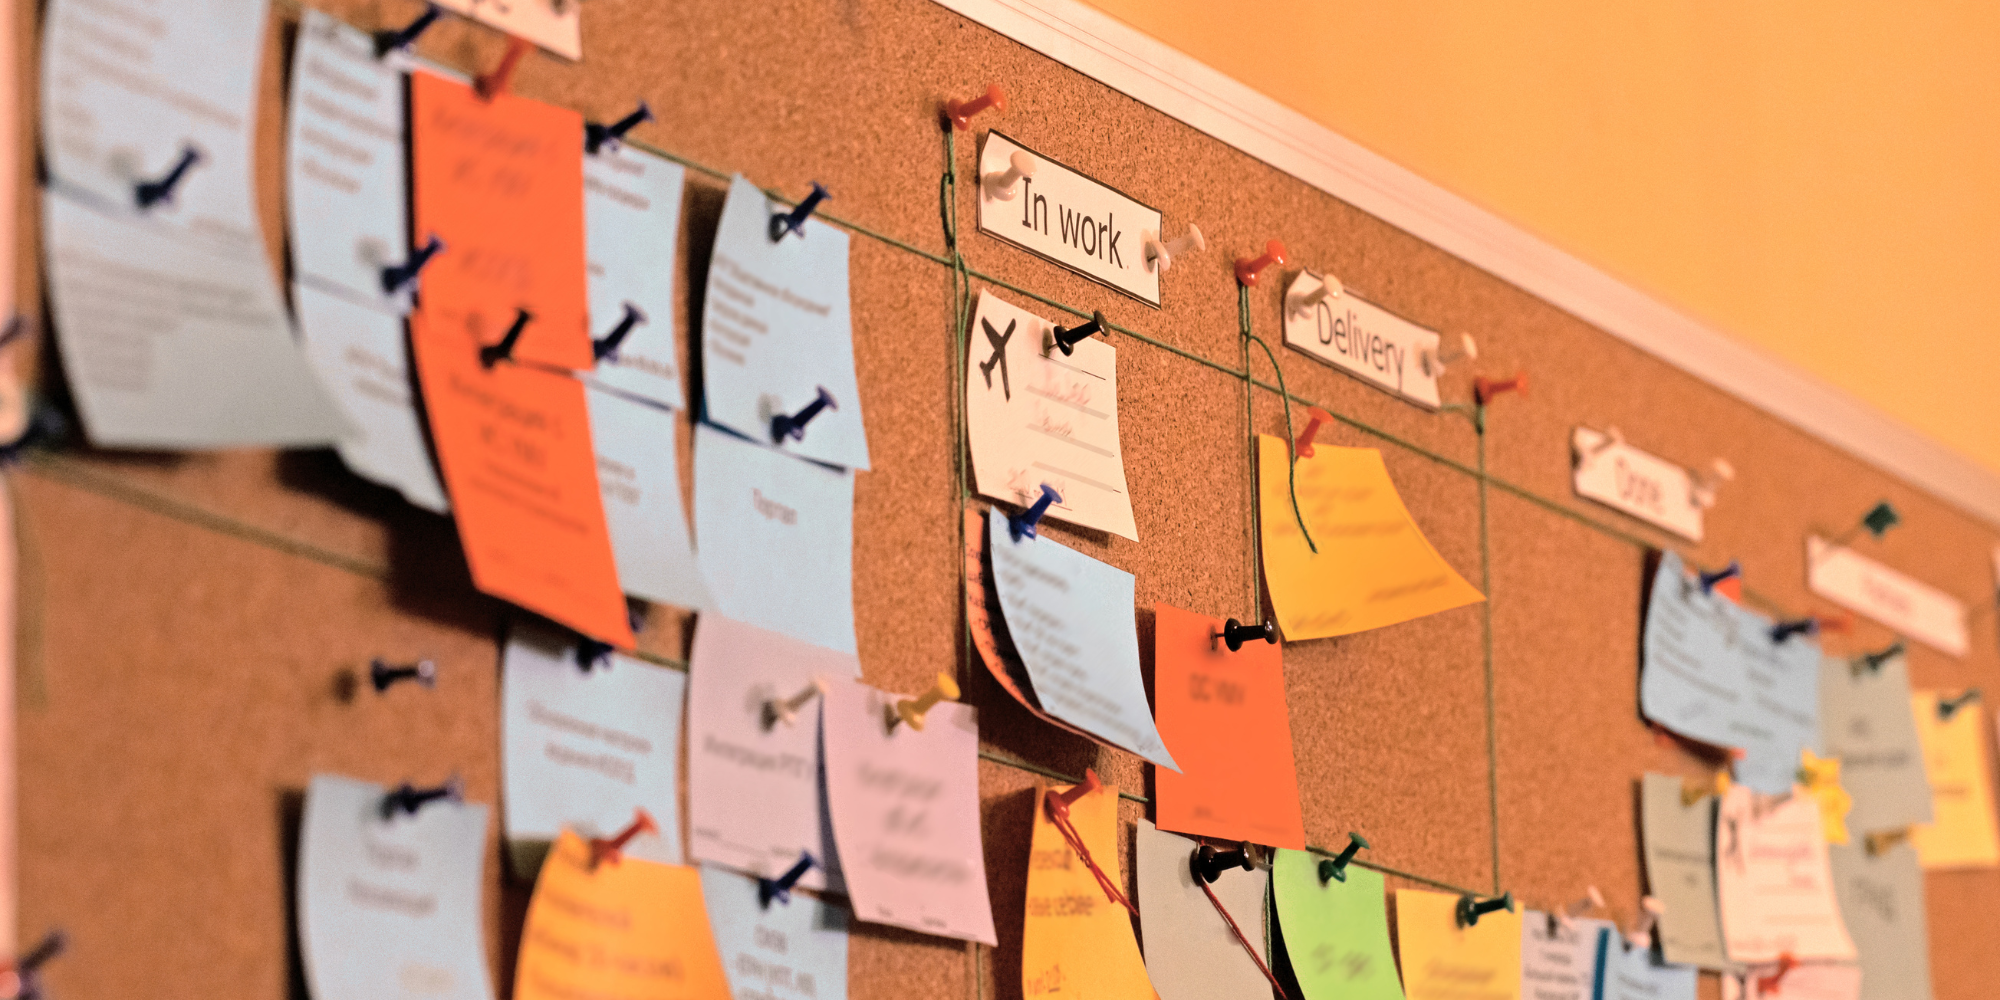 Traditional bulletin board with post-it notes